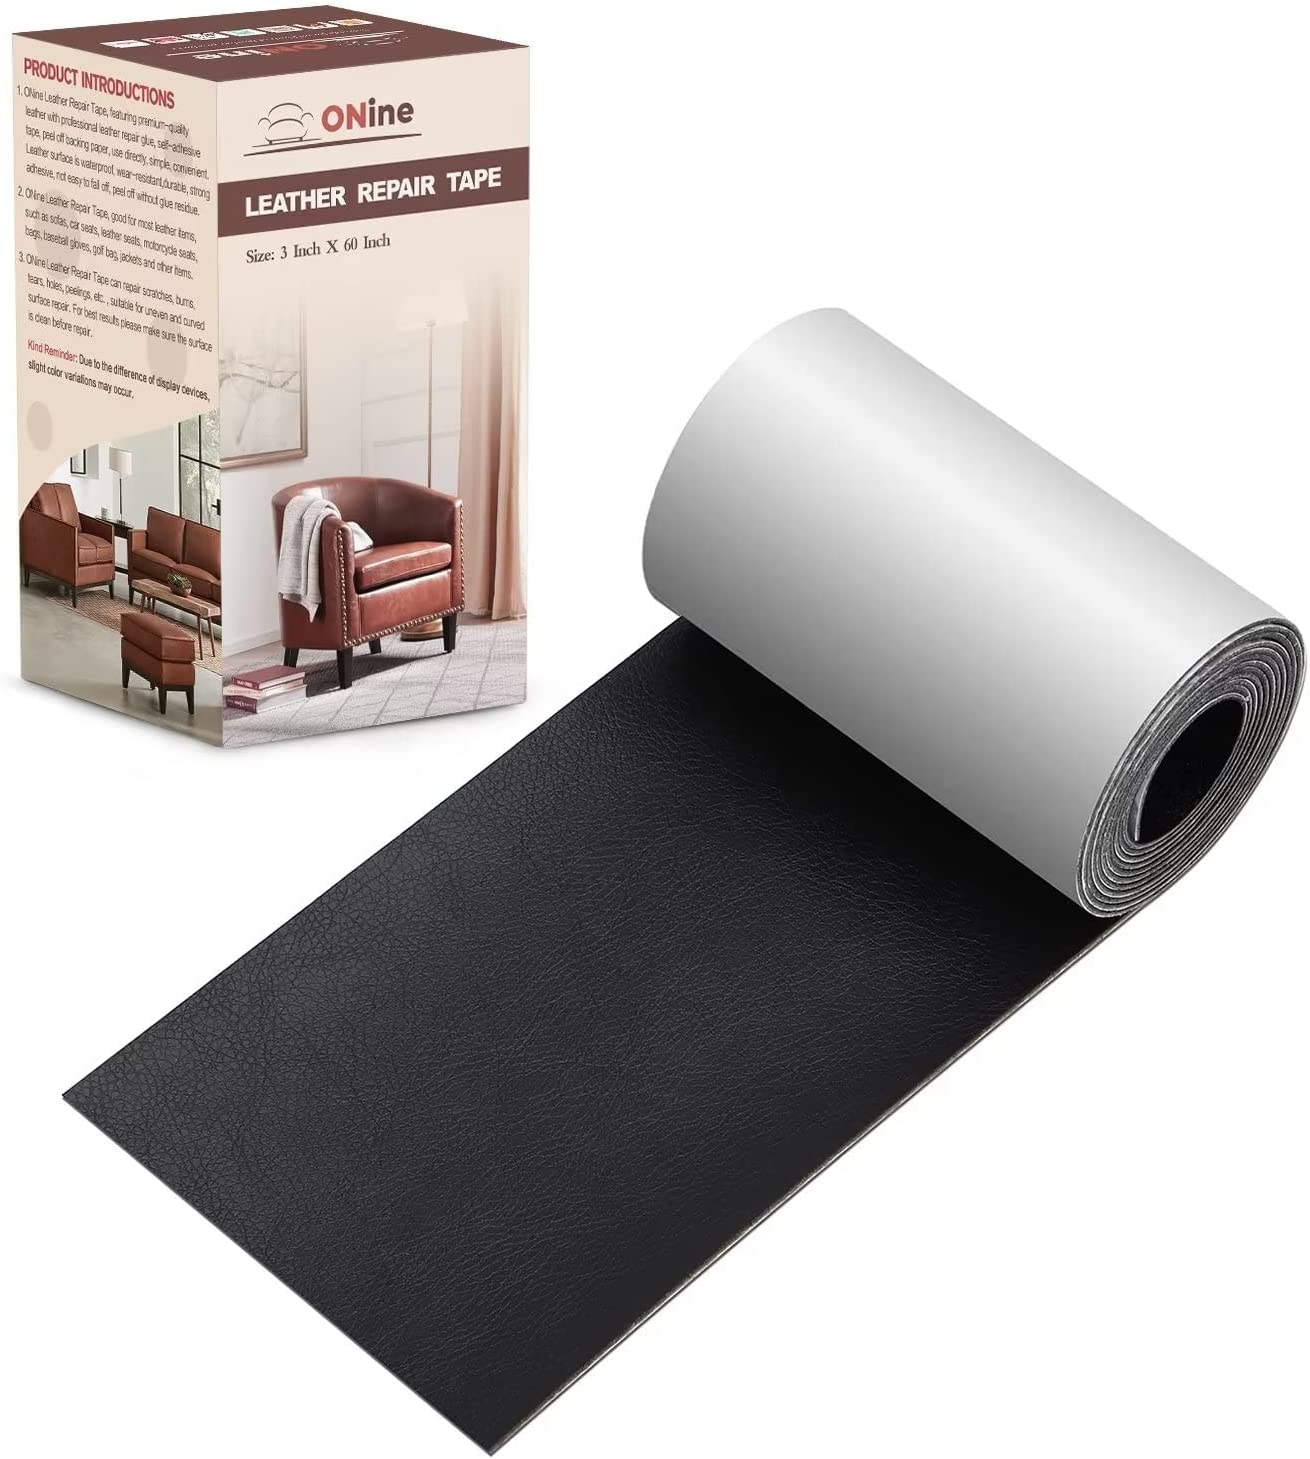 Leather Tape 3X60 Inch Self-Adhesive Leather Repair [...]